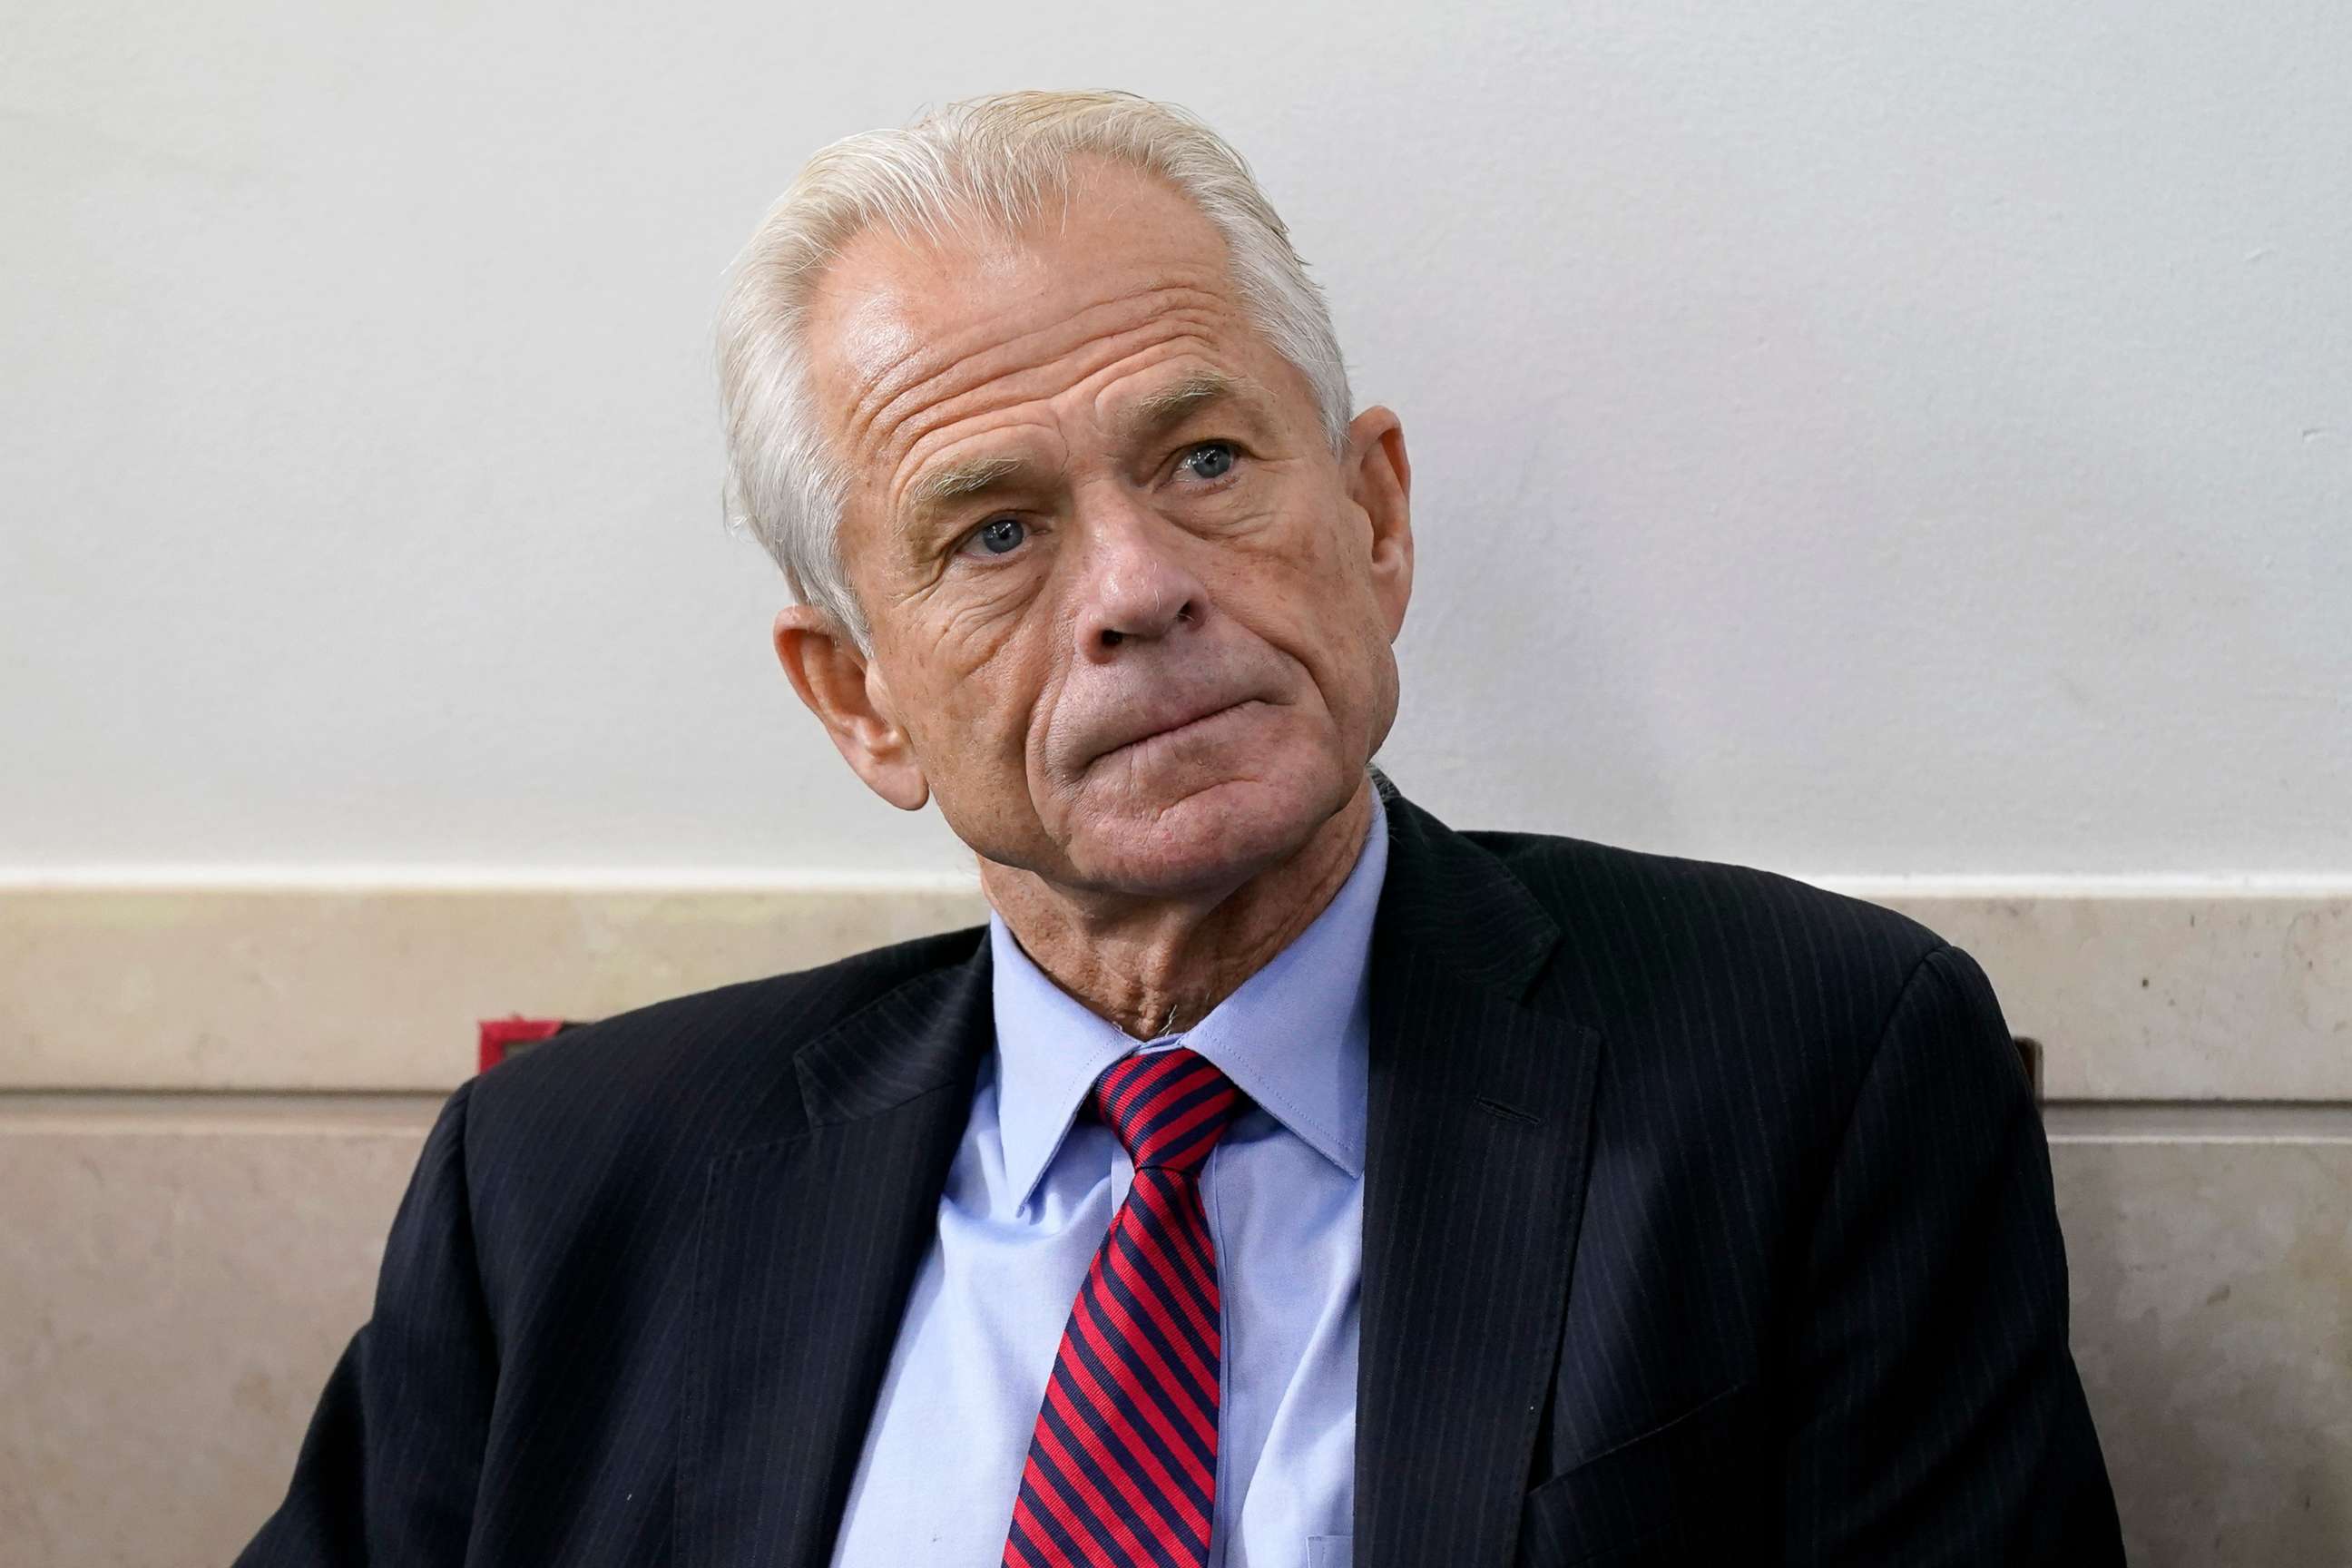 PHOTO: In this Aug. 14, 2020, file photo, White House trade adviser Peter Navarro listens as President Donald Trump speaks during a news conference at the White House, in Washington, D.C.